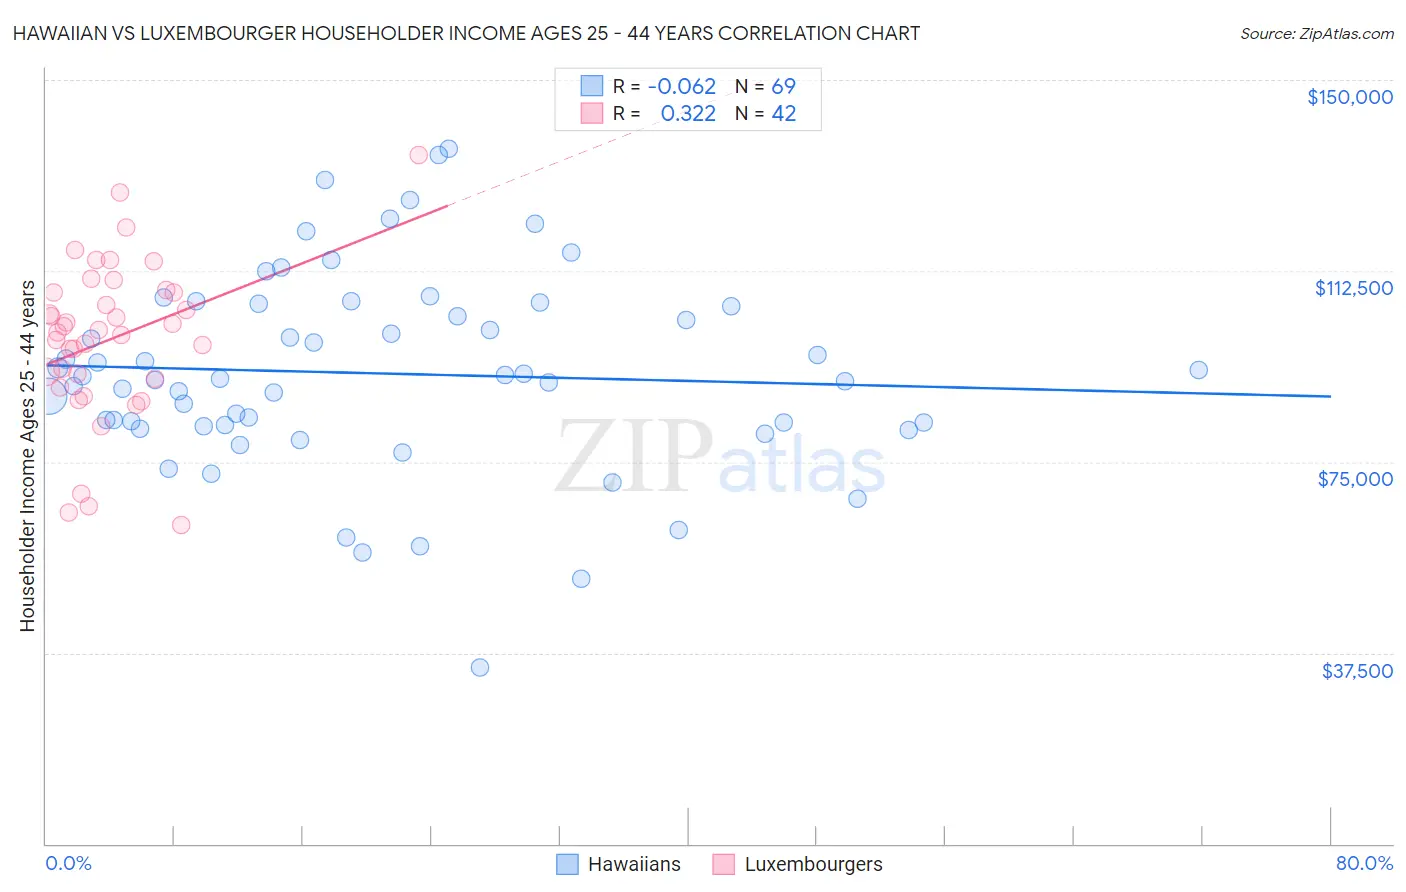 Hawaiian vs Luxembourger Householder Income Ages 25 - 44 years